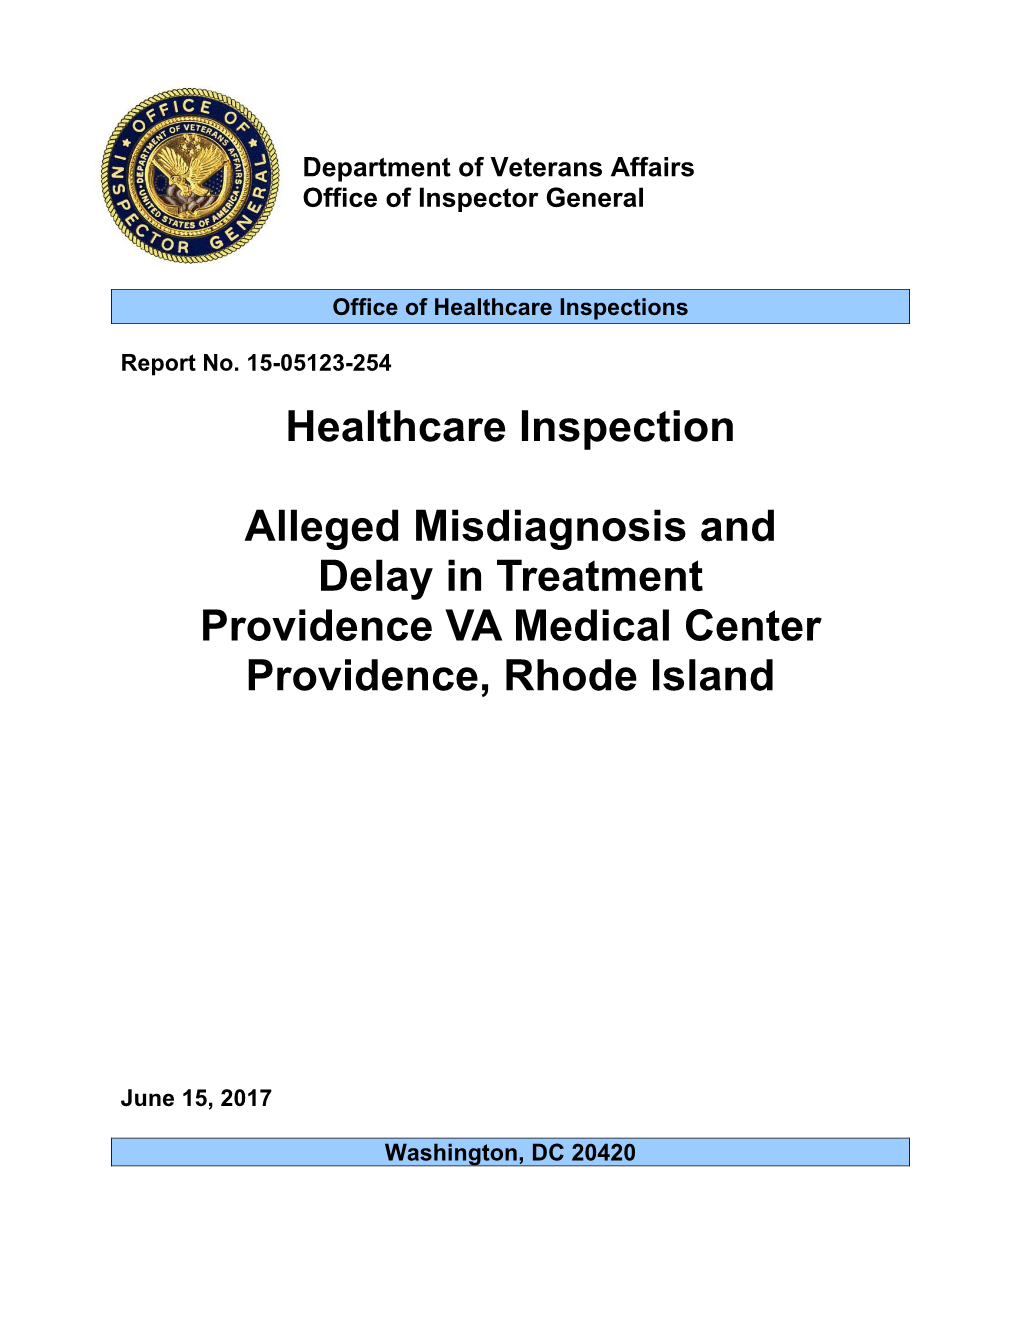 Healthcare Inspections